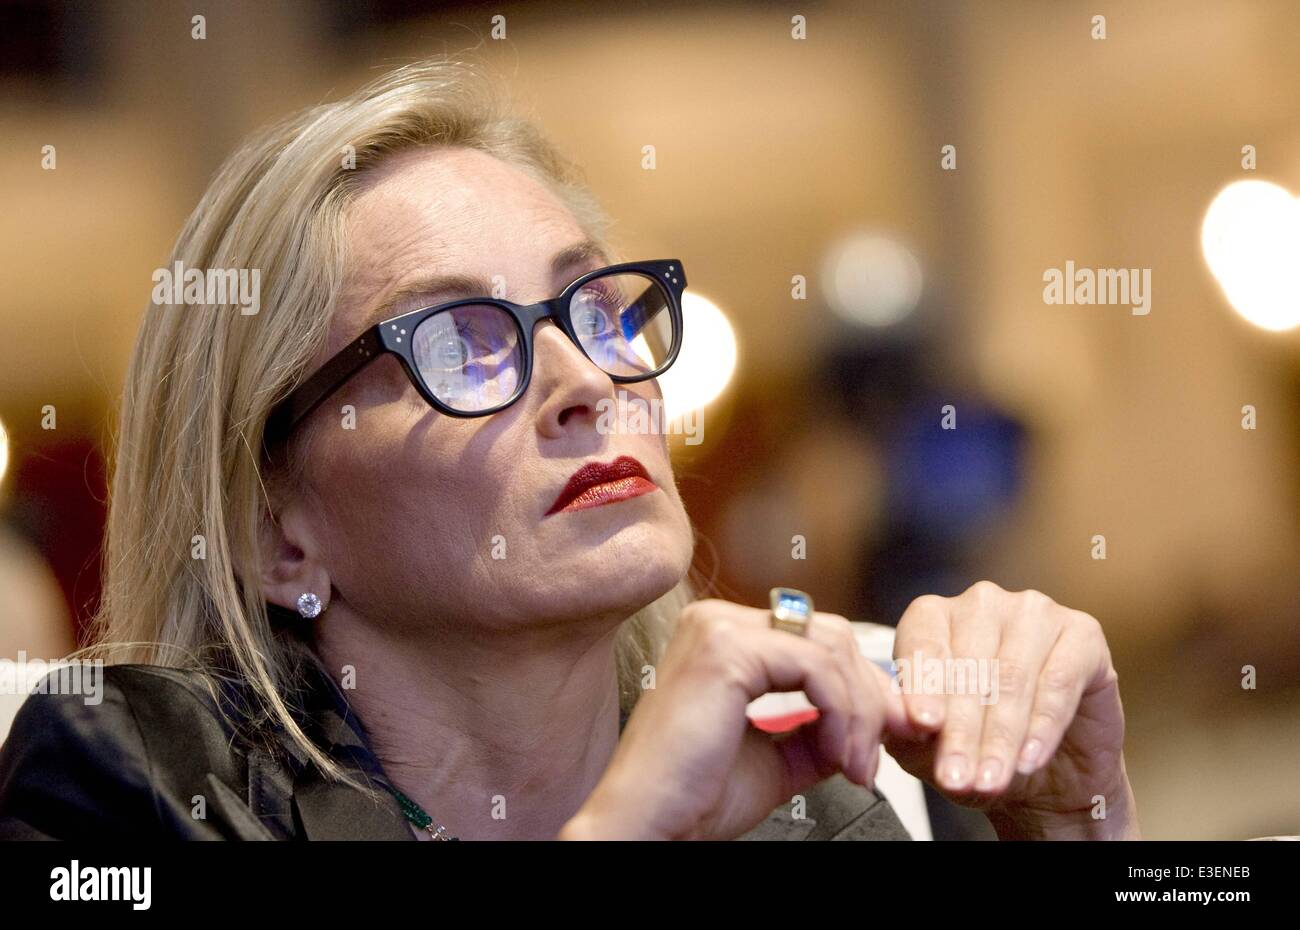 The 13th World Summit of Nobel Peace Prize Laureates held at the Polish parliament. Actress Sharon Stone will be awarded this year with the Peace Summit Award for her HIV/AIDS humanitarian work  Featuring: Sharon Stone Where: Warsaw, Poland When: 22 Oct 2 Stock Photo